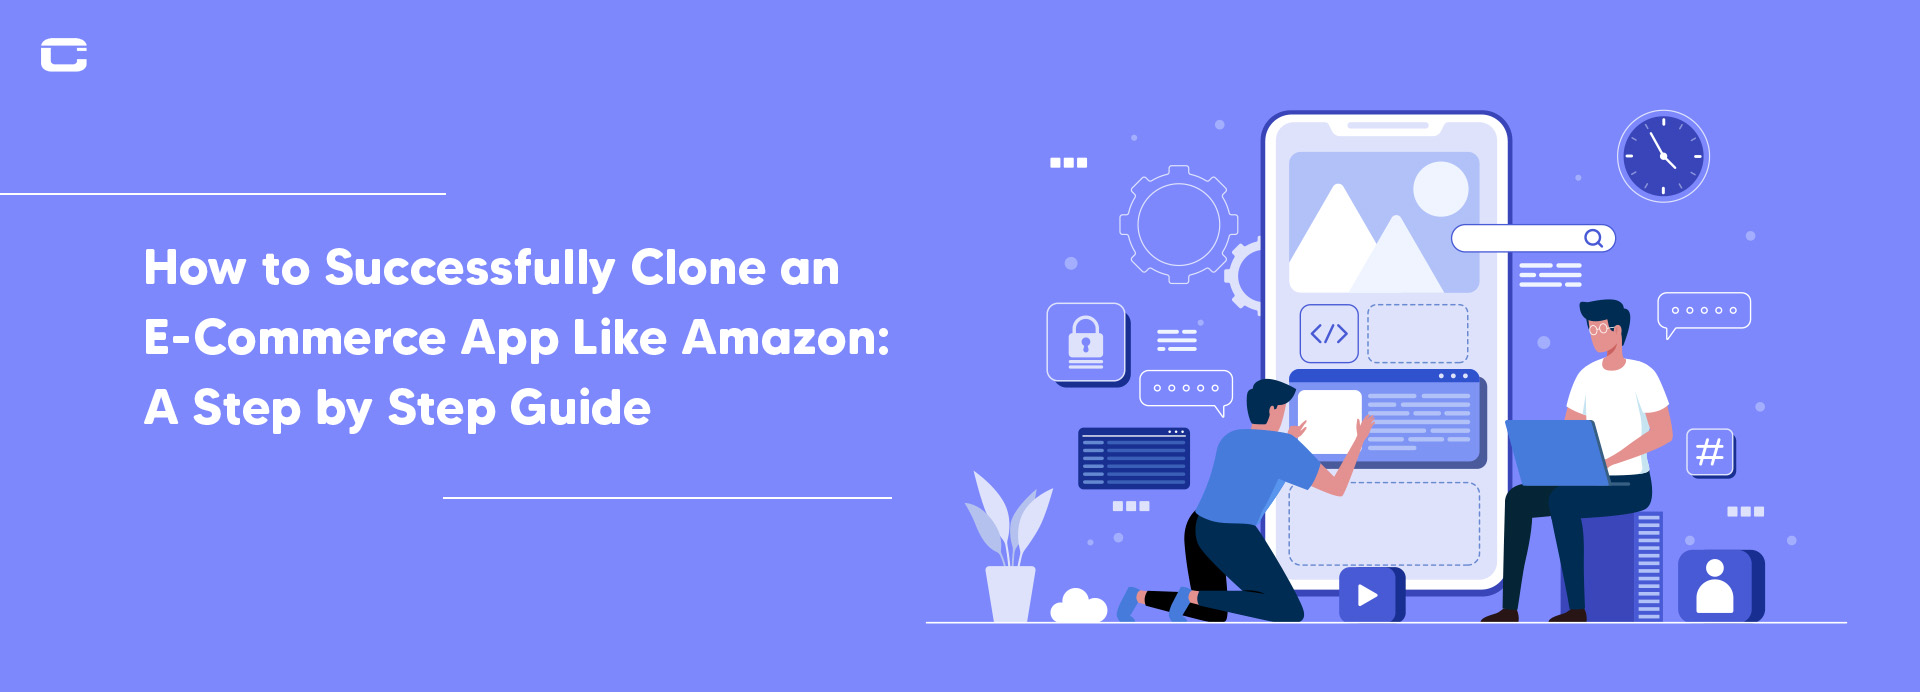 How to Successfully Clone an eCommerce App Like Amazon: A Step by Step Guide